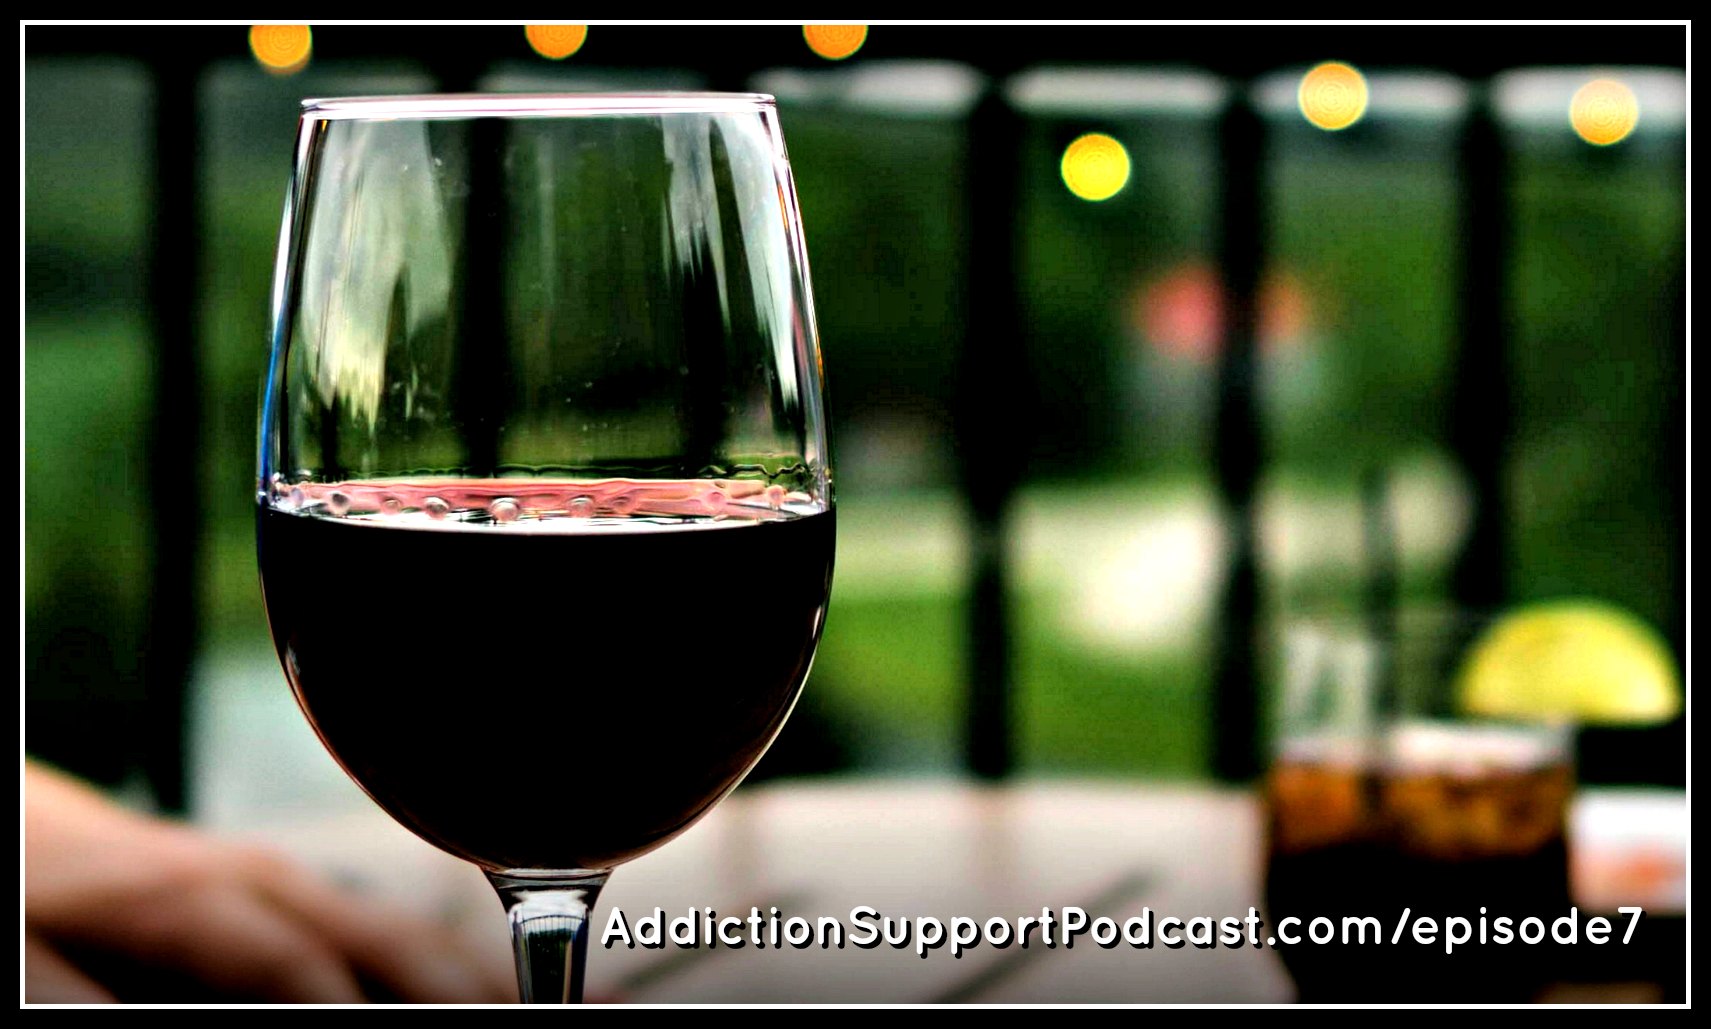 Addiction Support Podcast, Alcohol Addiction Support and Story